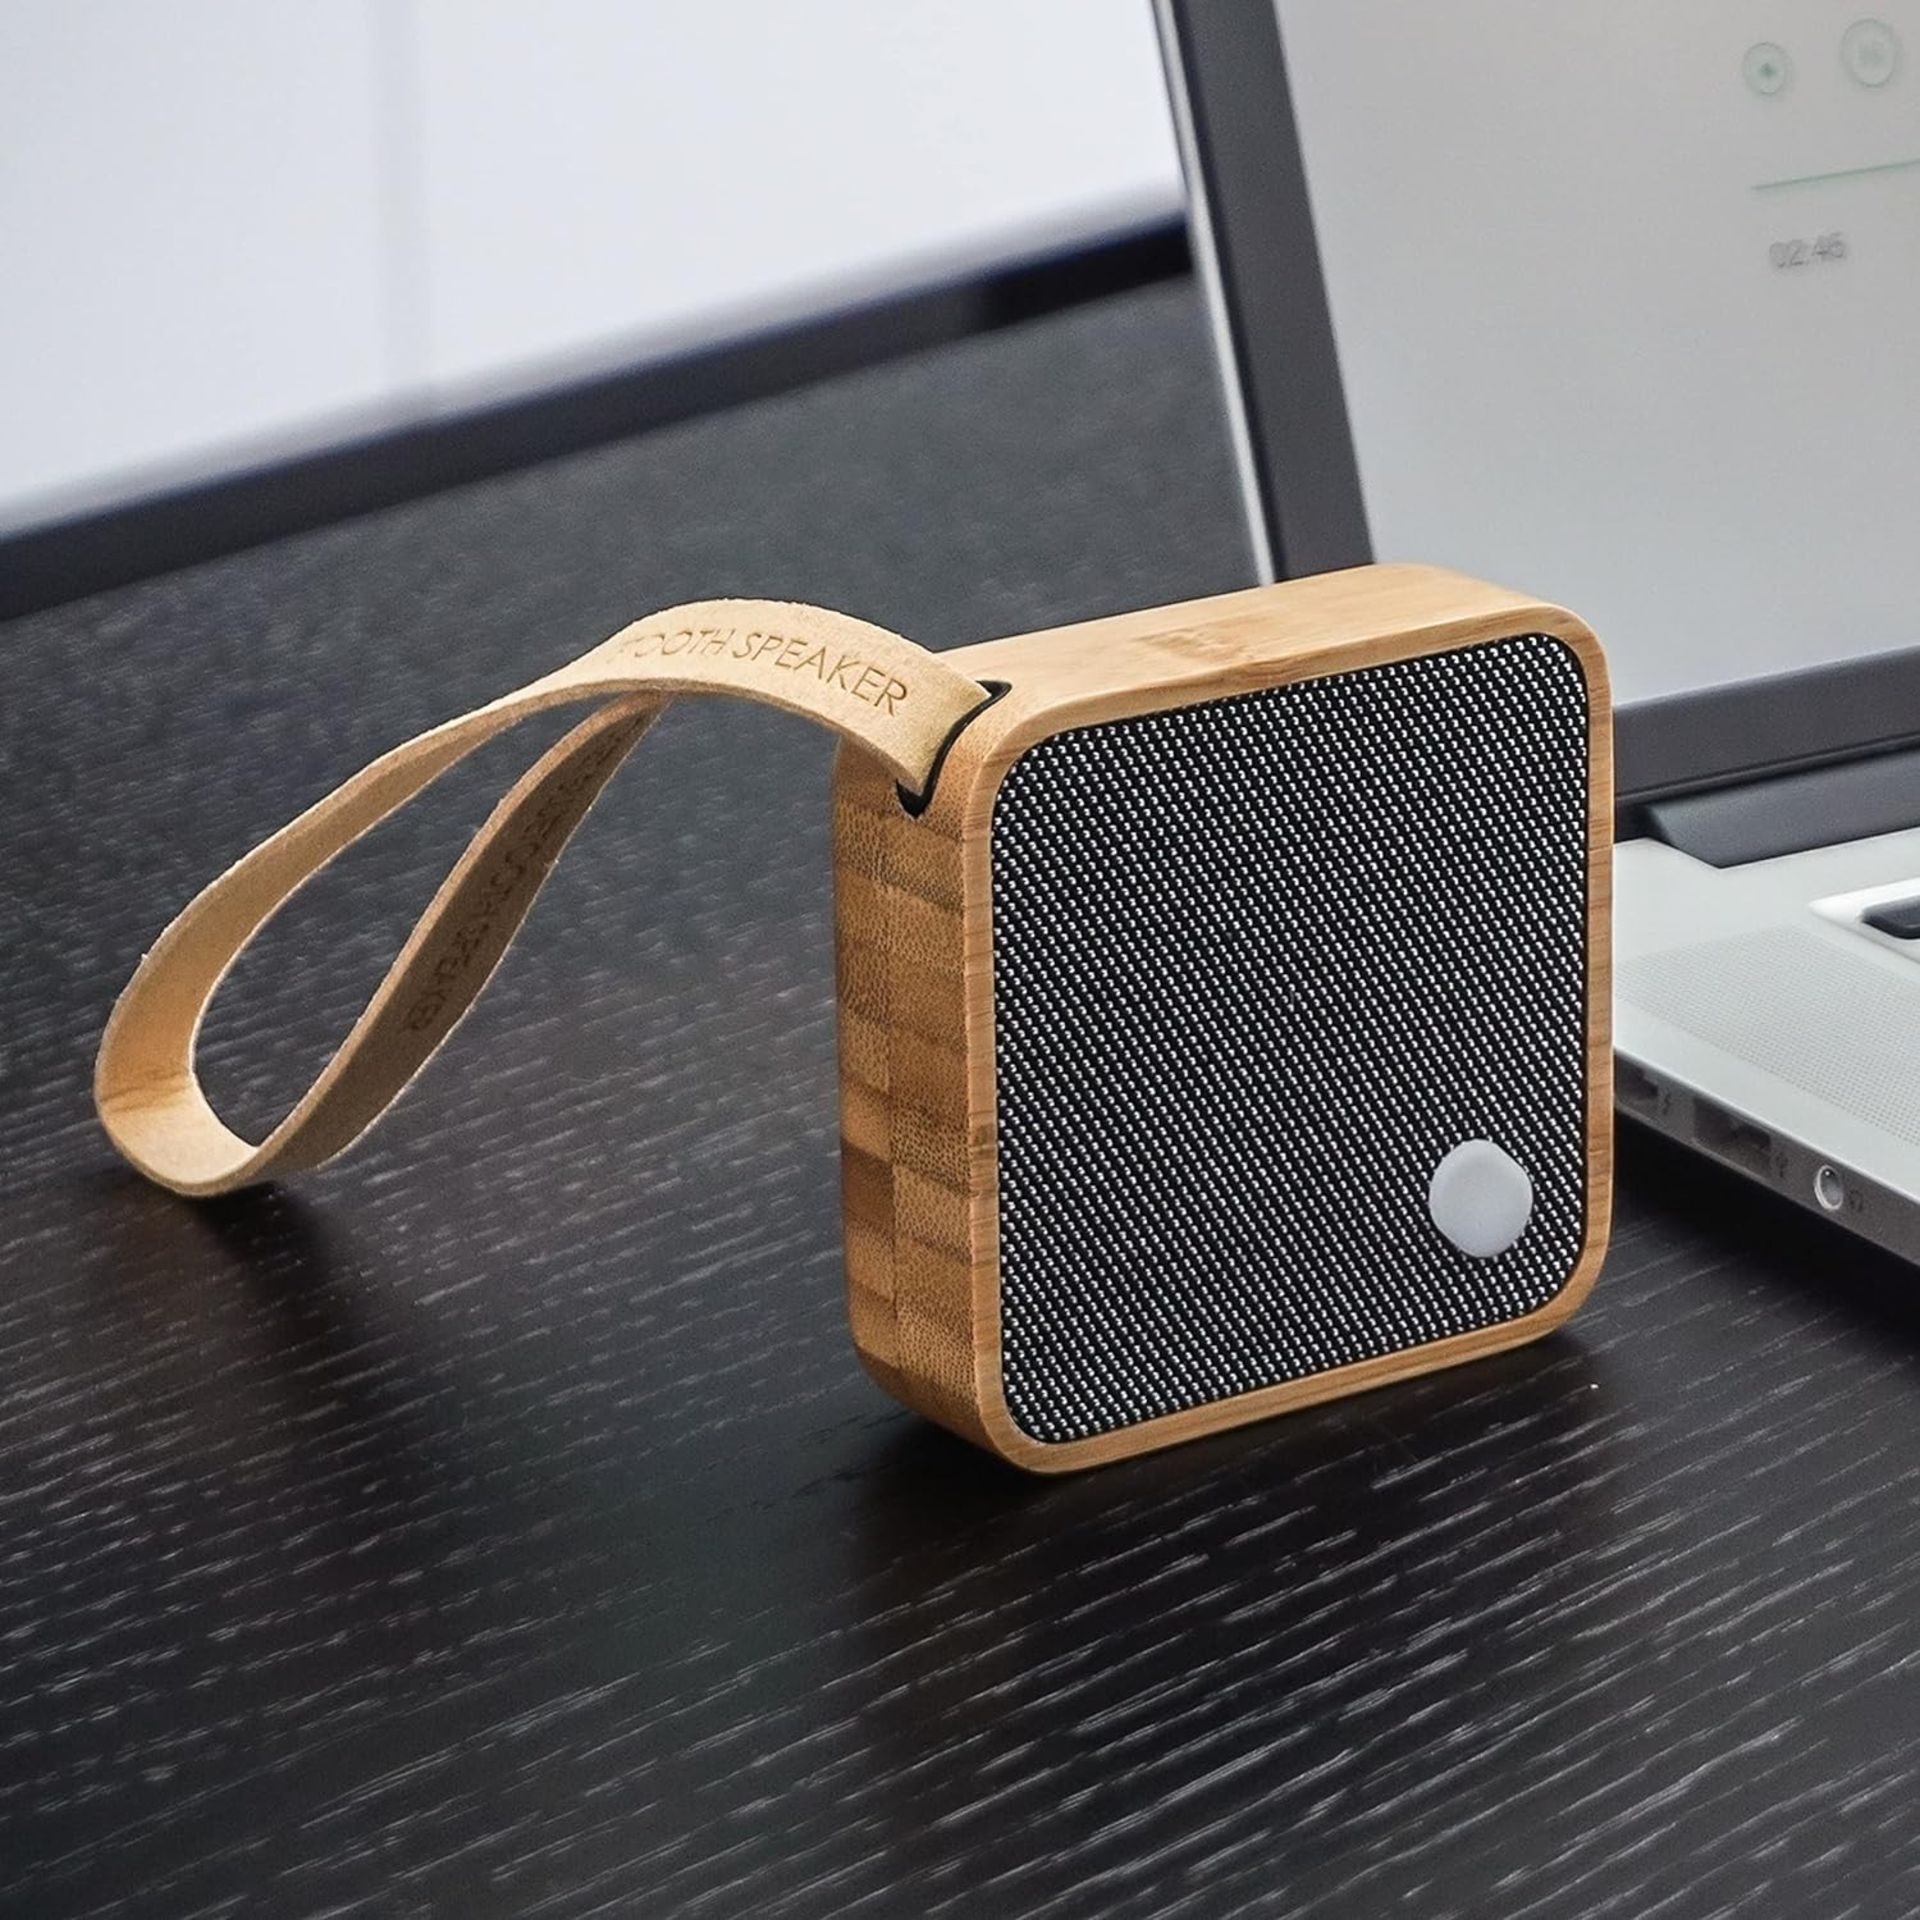 20 X NEW GINGKO MI SQUARE POCKET SOLID WOOD PORTABLE BLUETOOTH SPEAKER RECHARGEABLE BATTERY